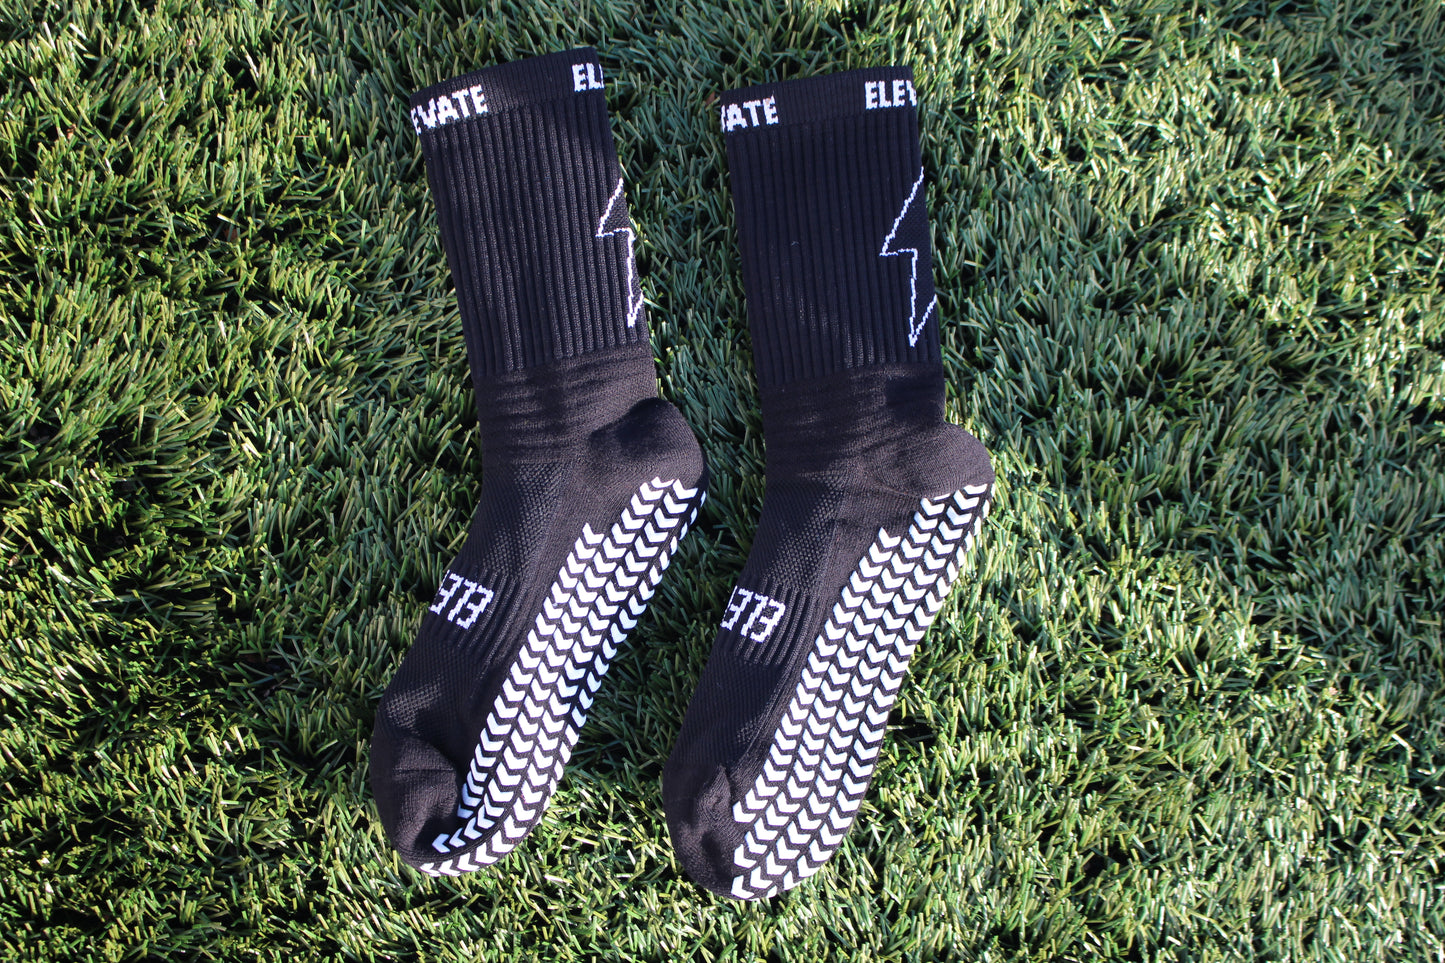 Elevate Grip Socks - Black with white grips.